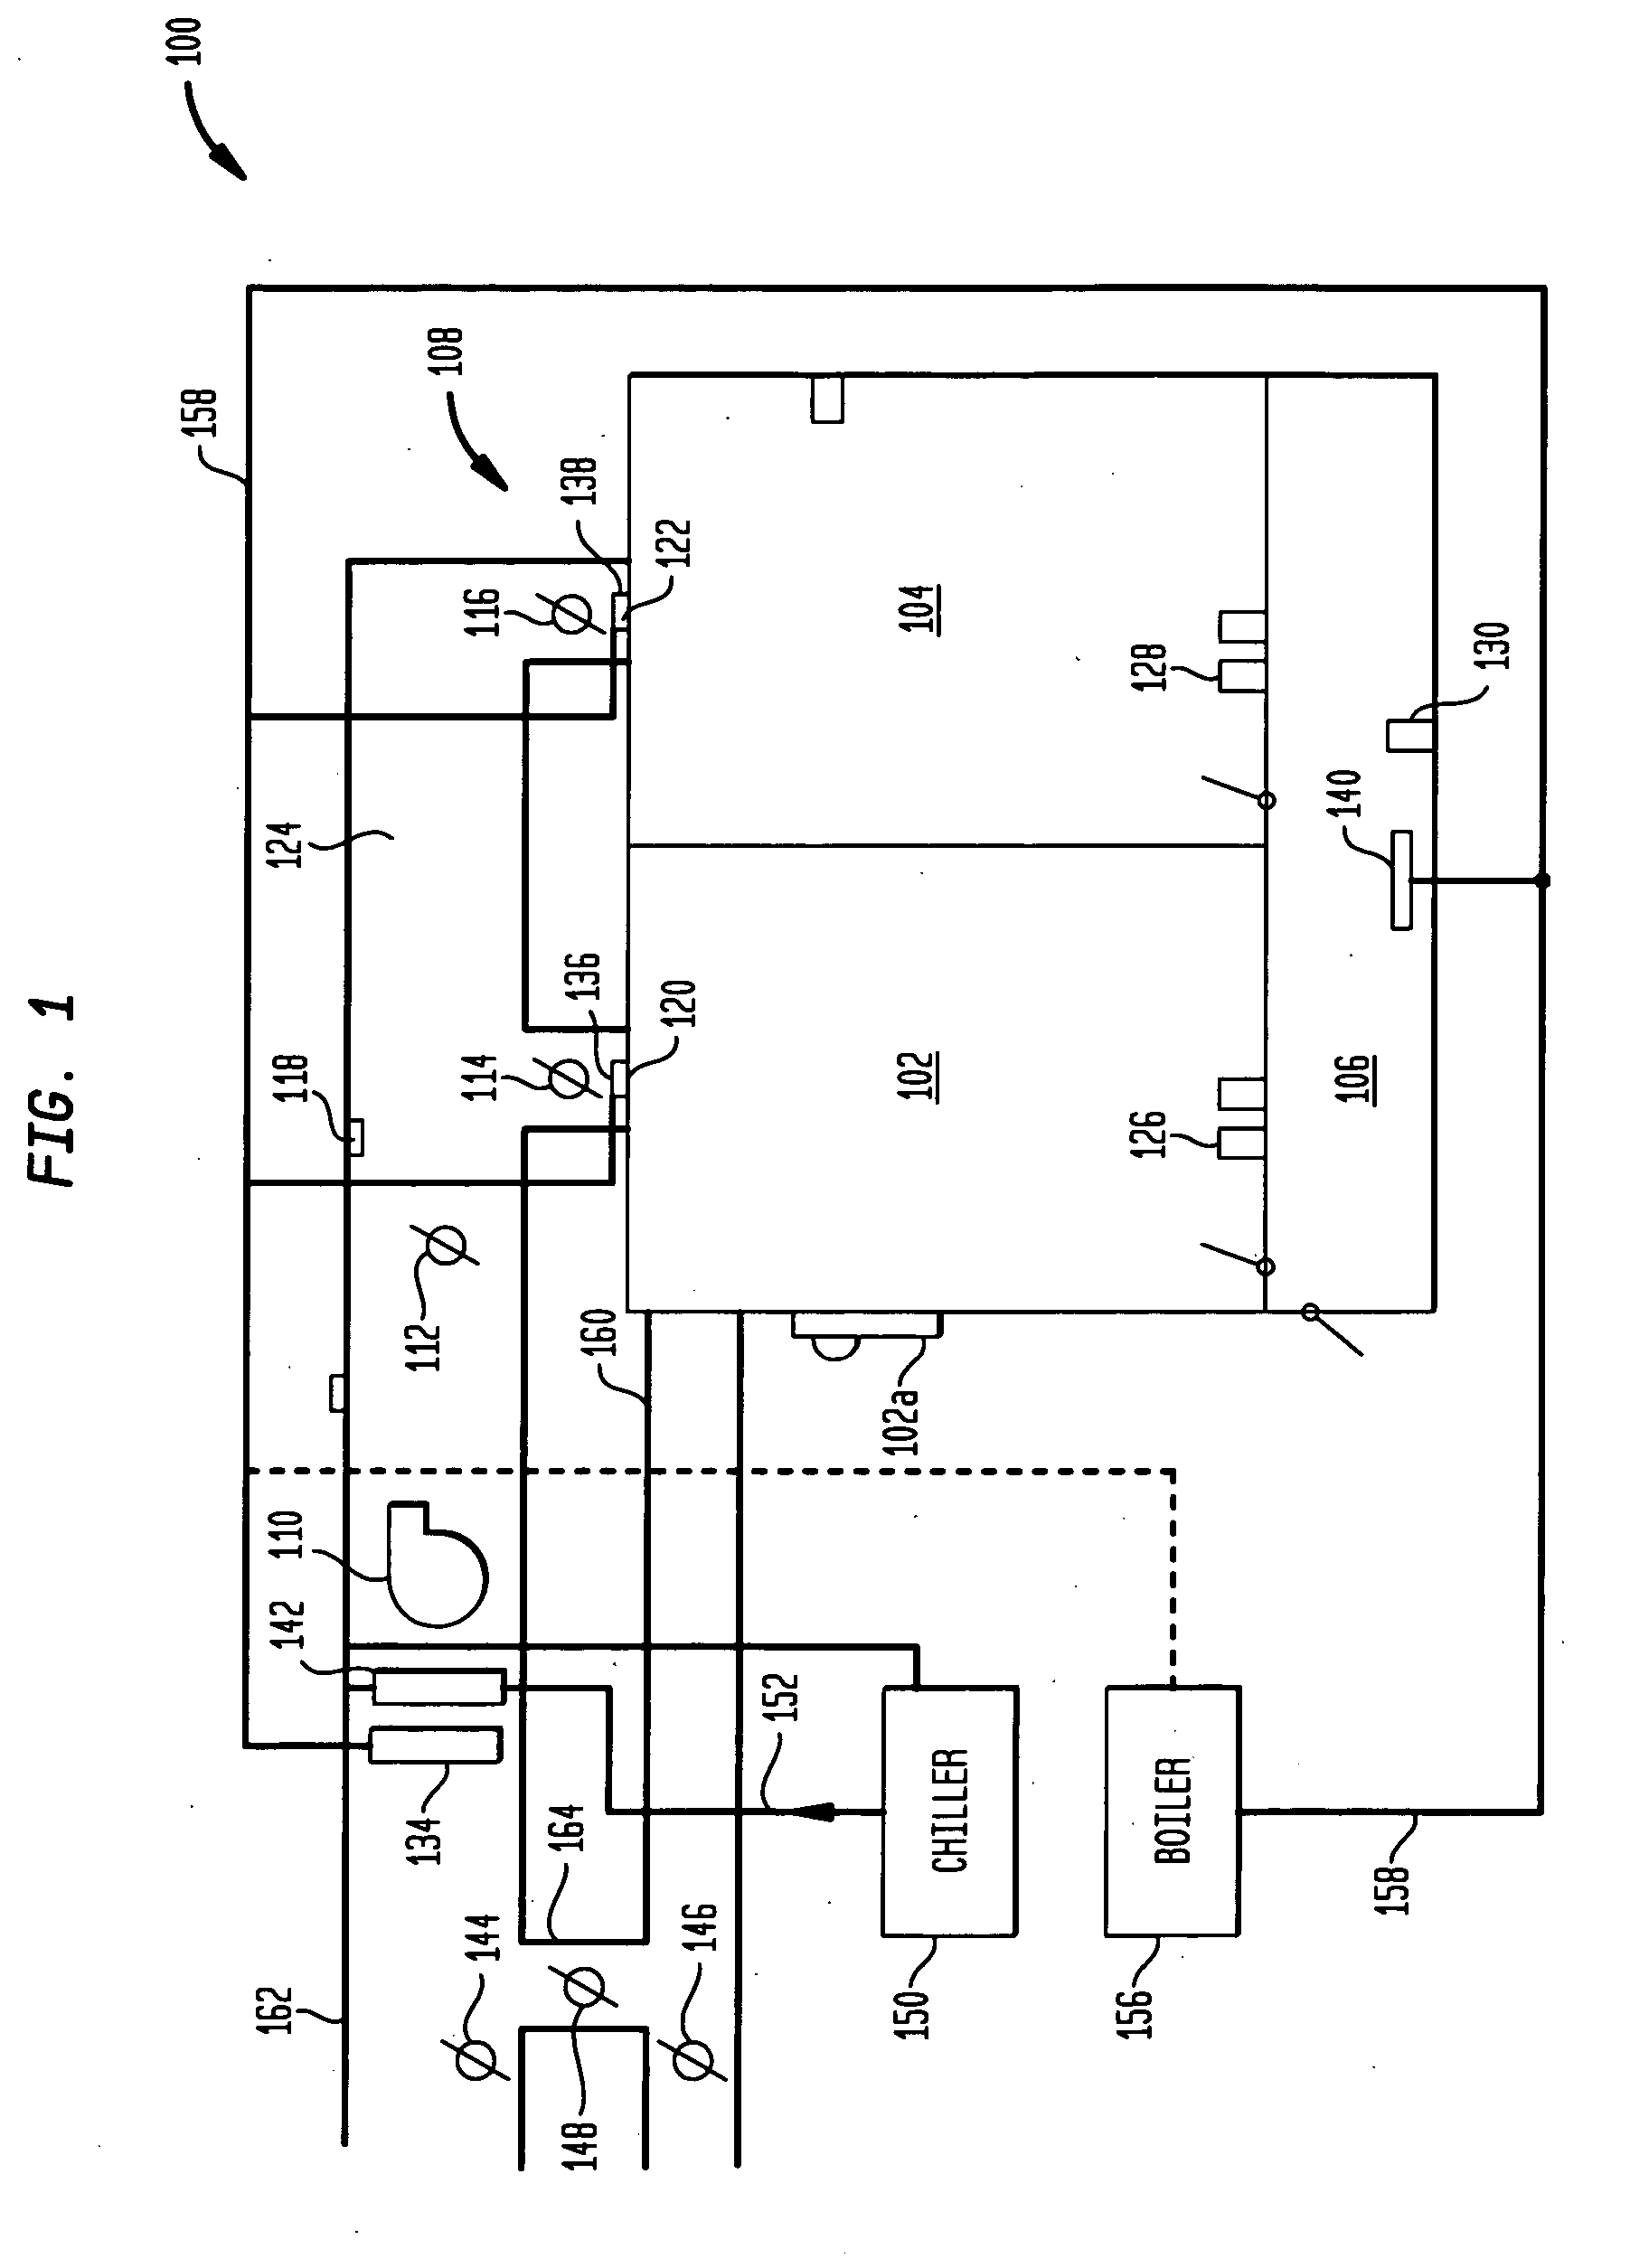 Method and apparatus for representing a building system